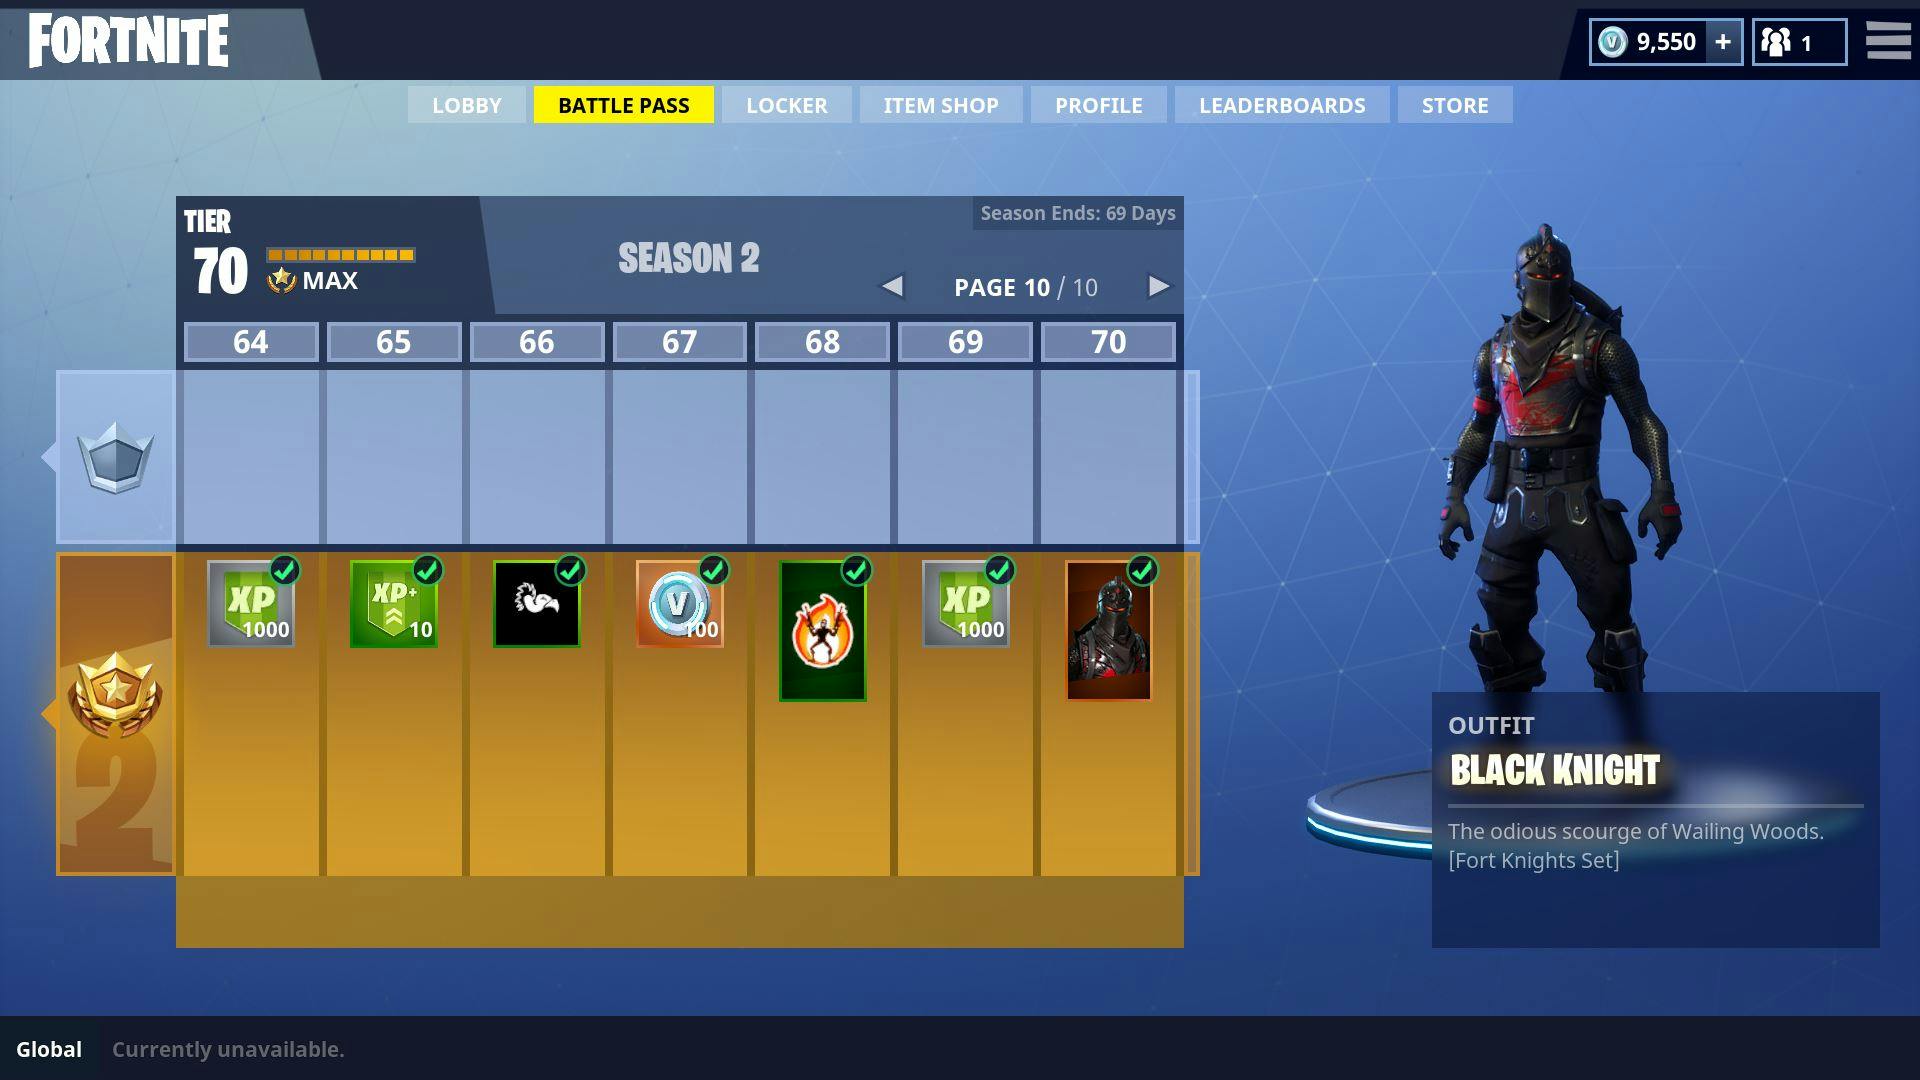 The top rewards of the Premium Fortnite Battle Pass, shown in gold,  feature experience point boosts, impressive skins, and even in-game currency. But it appears as though the free Battle Pass doesn't offer as much. 